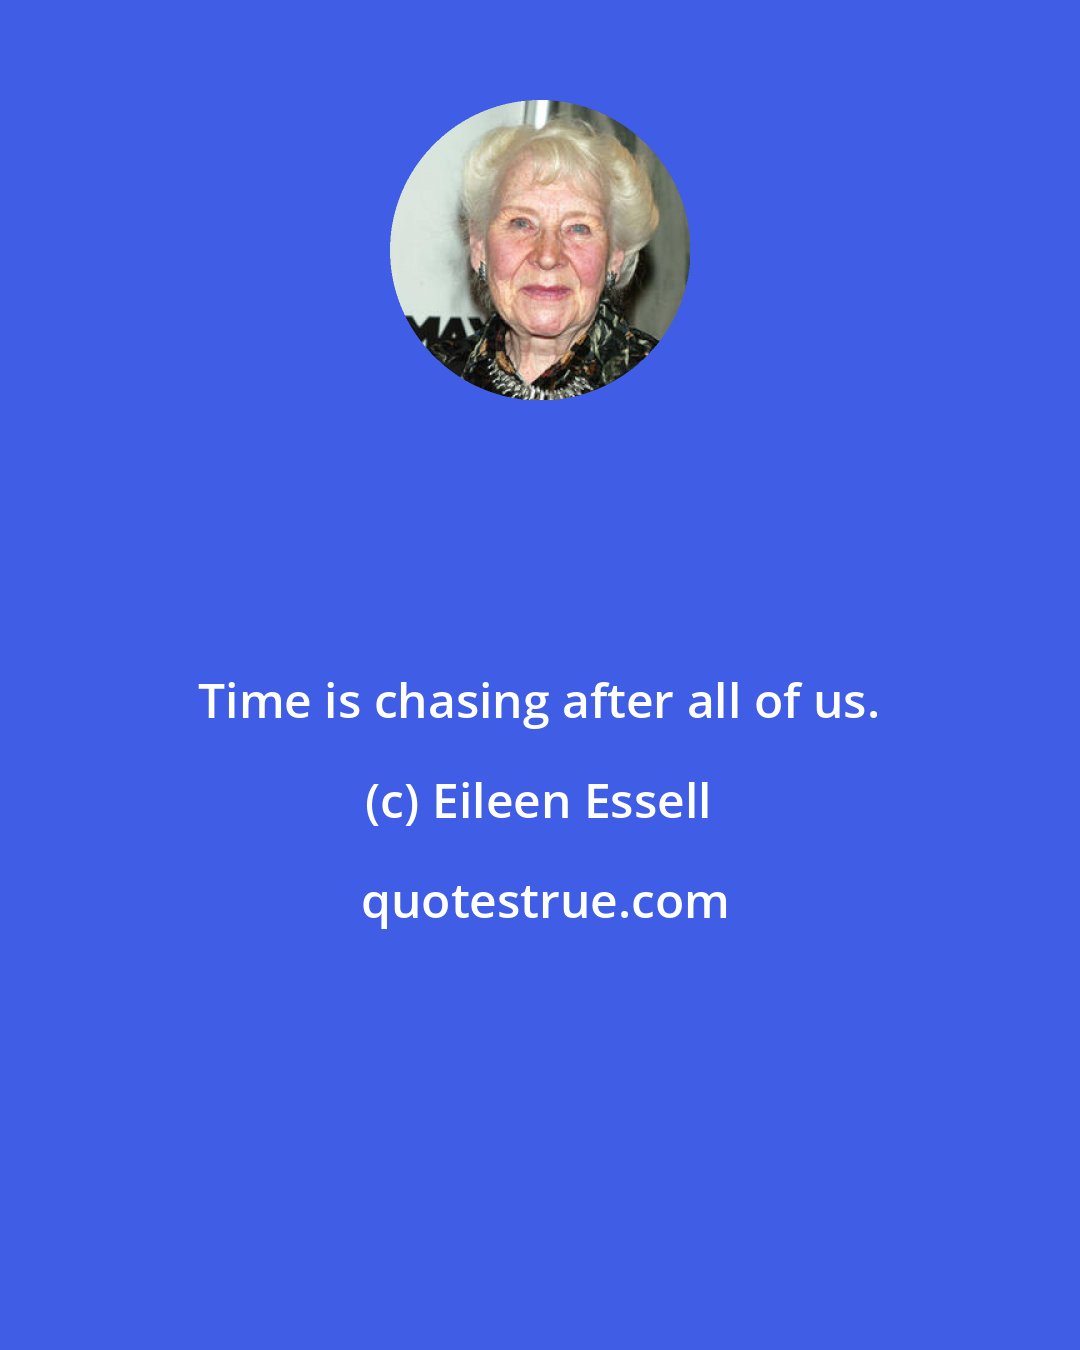 Eileen Essell: Time is chasing after all of us.